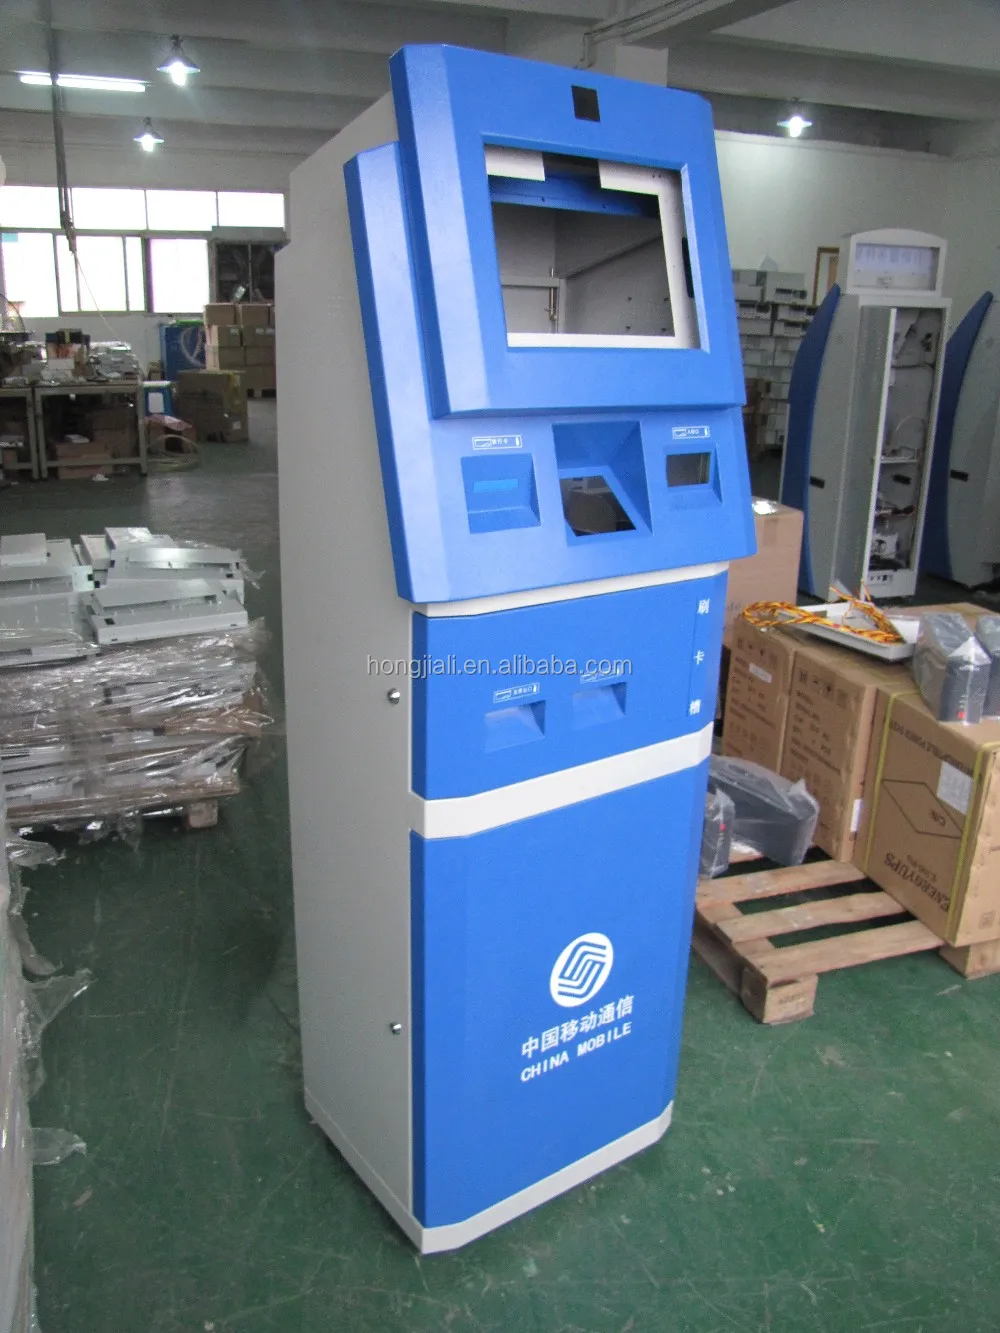 Bitcoin Atm Machine With Touch Screen - Buy Bitcoin Atm Product on